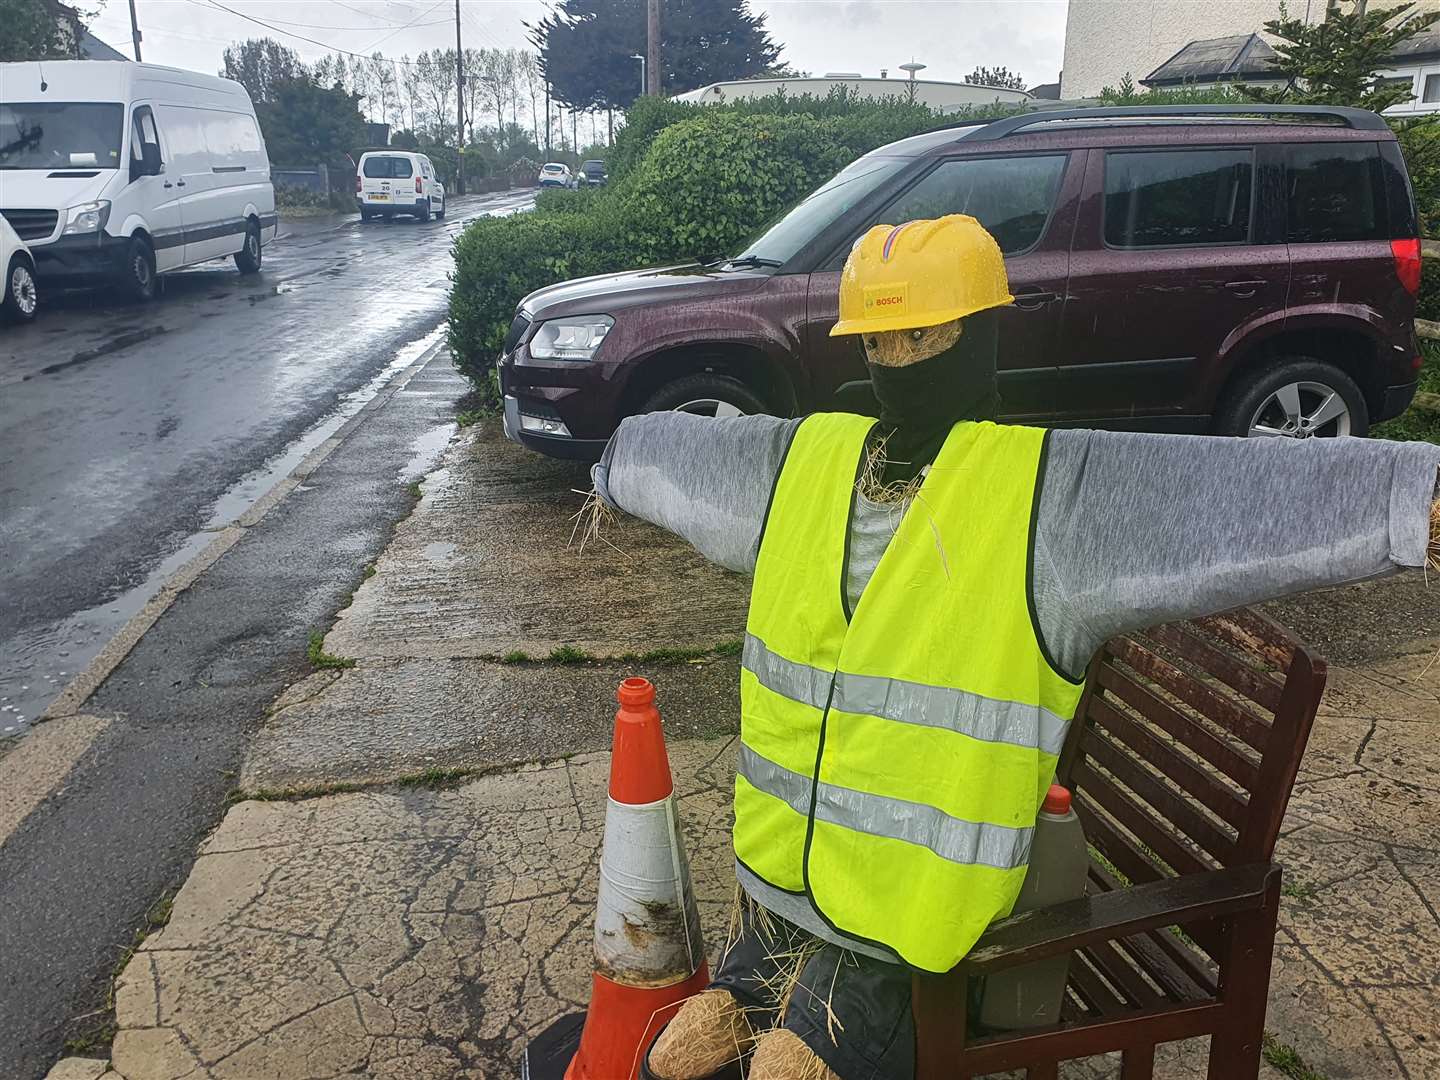 This scarecrow, complete with high-vis jacket and hard hat, keeps watch